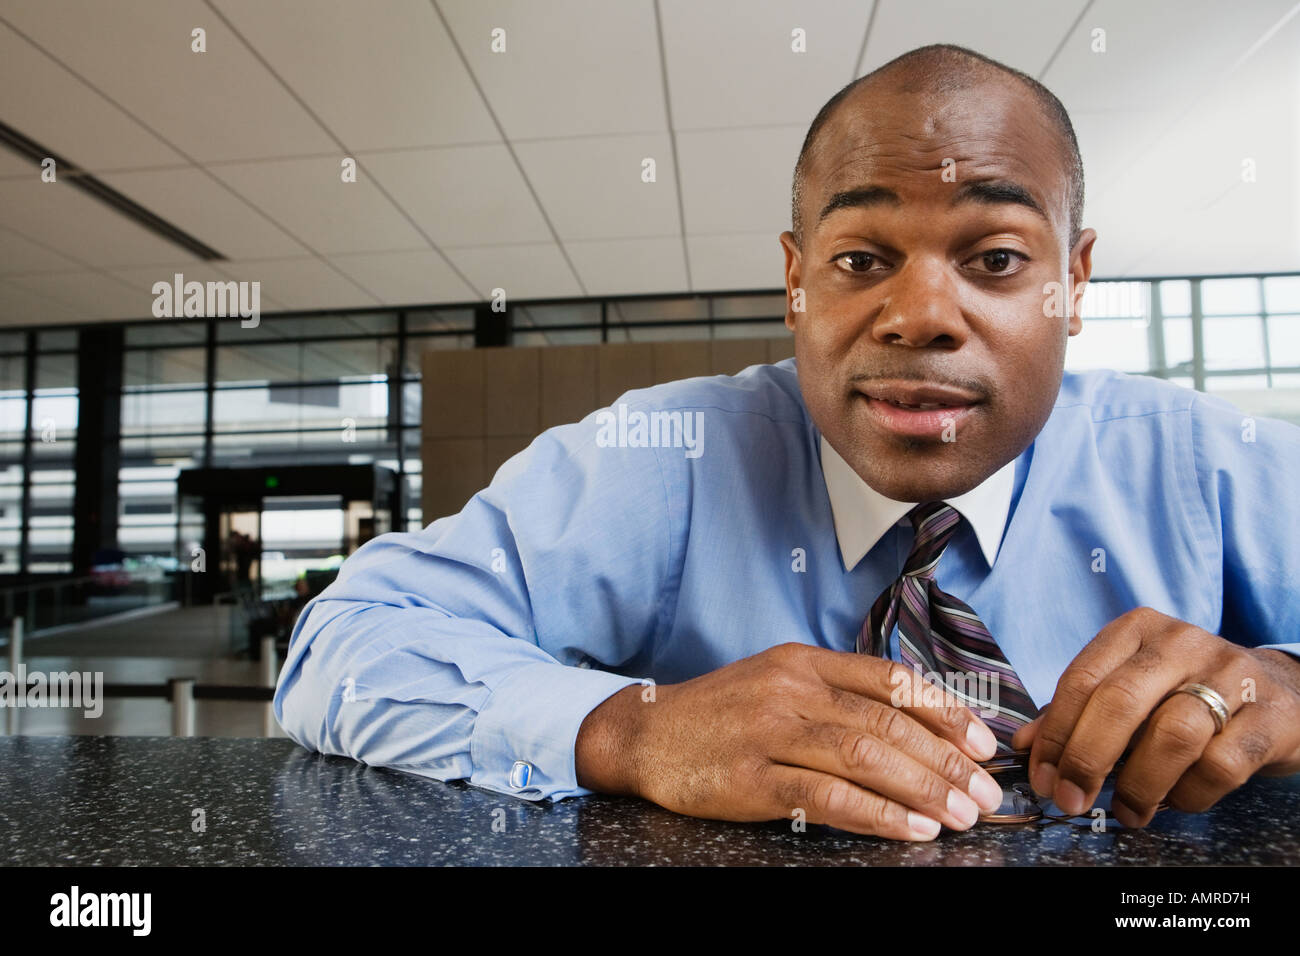 African businessman leaning on counter Stock Photo